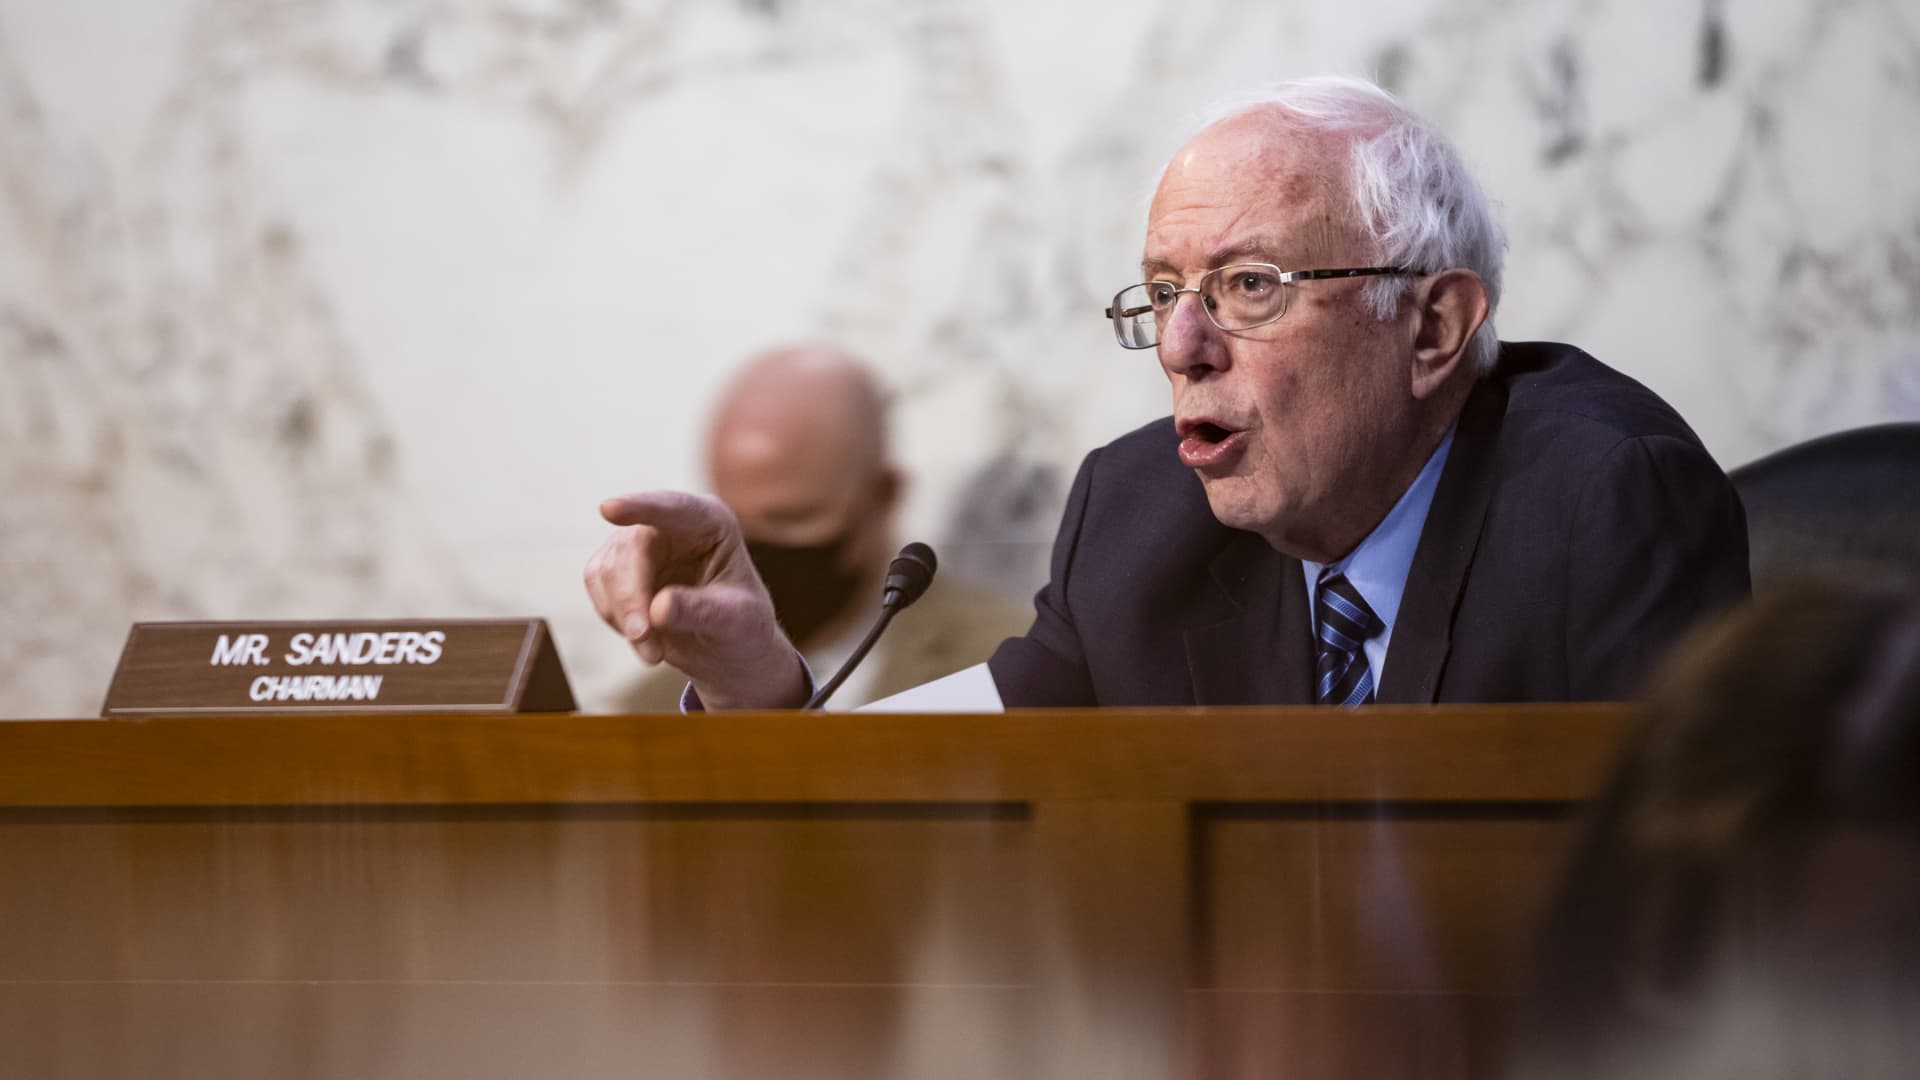 Senator Bernie Sanders, an independent from Vermont and chairman of the Senate Budget Committee, speaks during a hearing in Washington, D.C., U.S., on Wednesday, March 17, 2021.